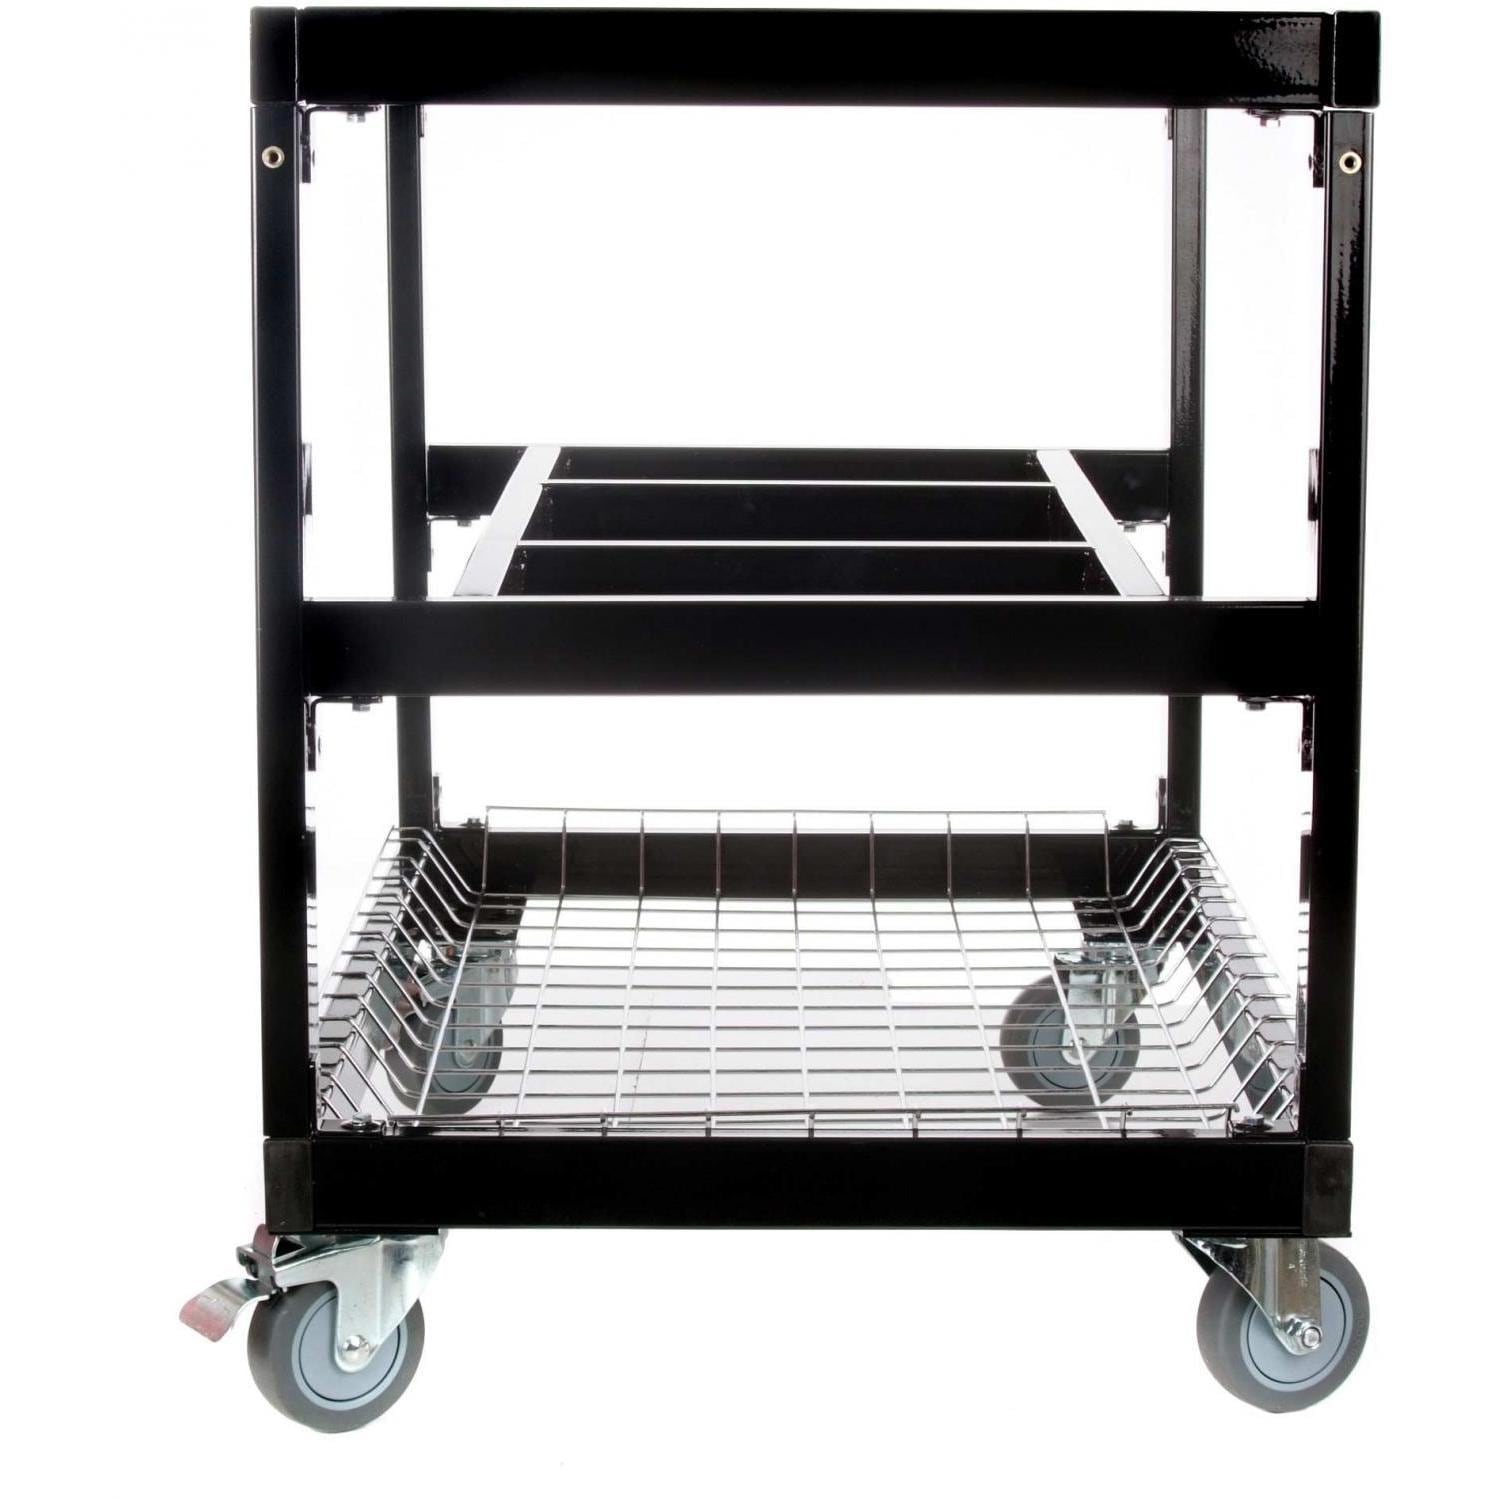 Primo Grills 368 Cart with Basket for Extra Large 400 & Oval Large 300 Grills - image 3 of 5